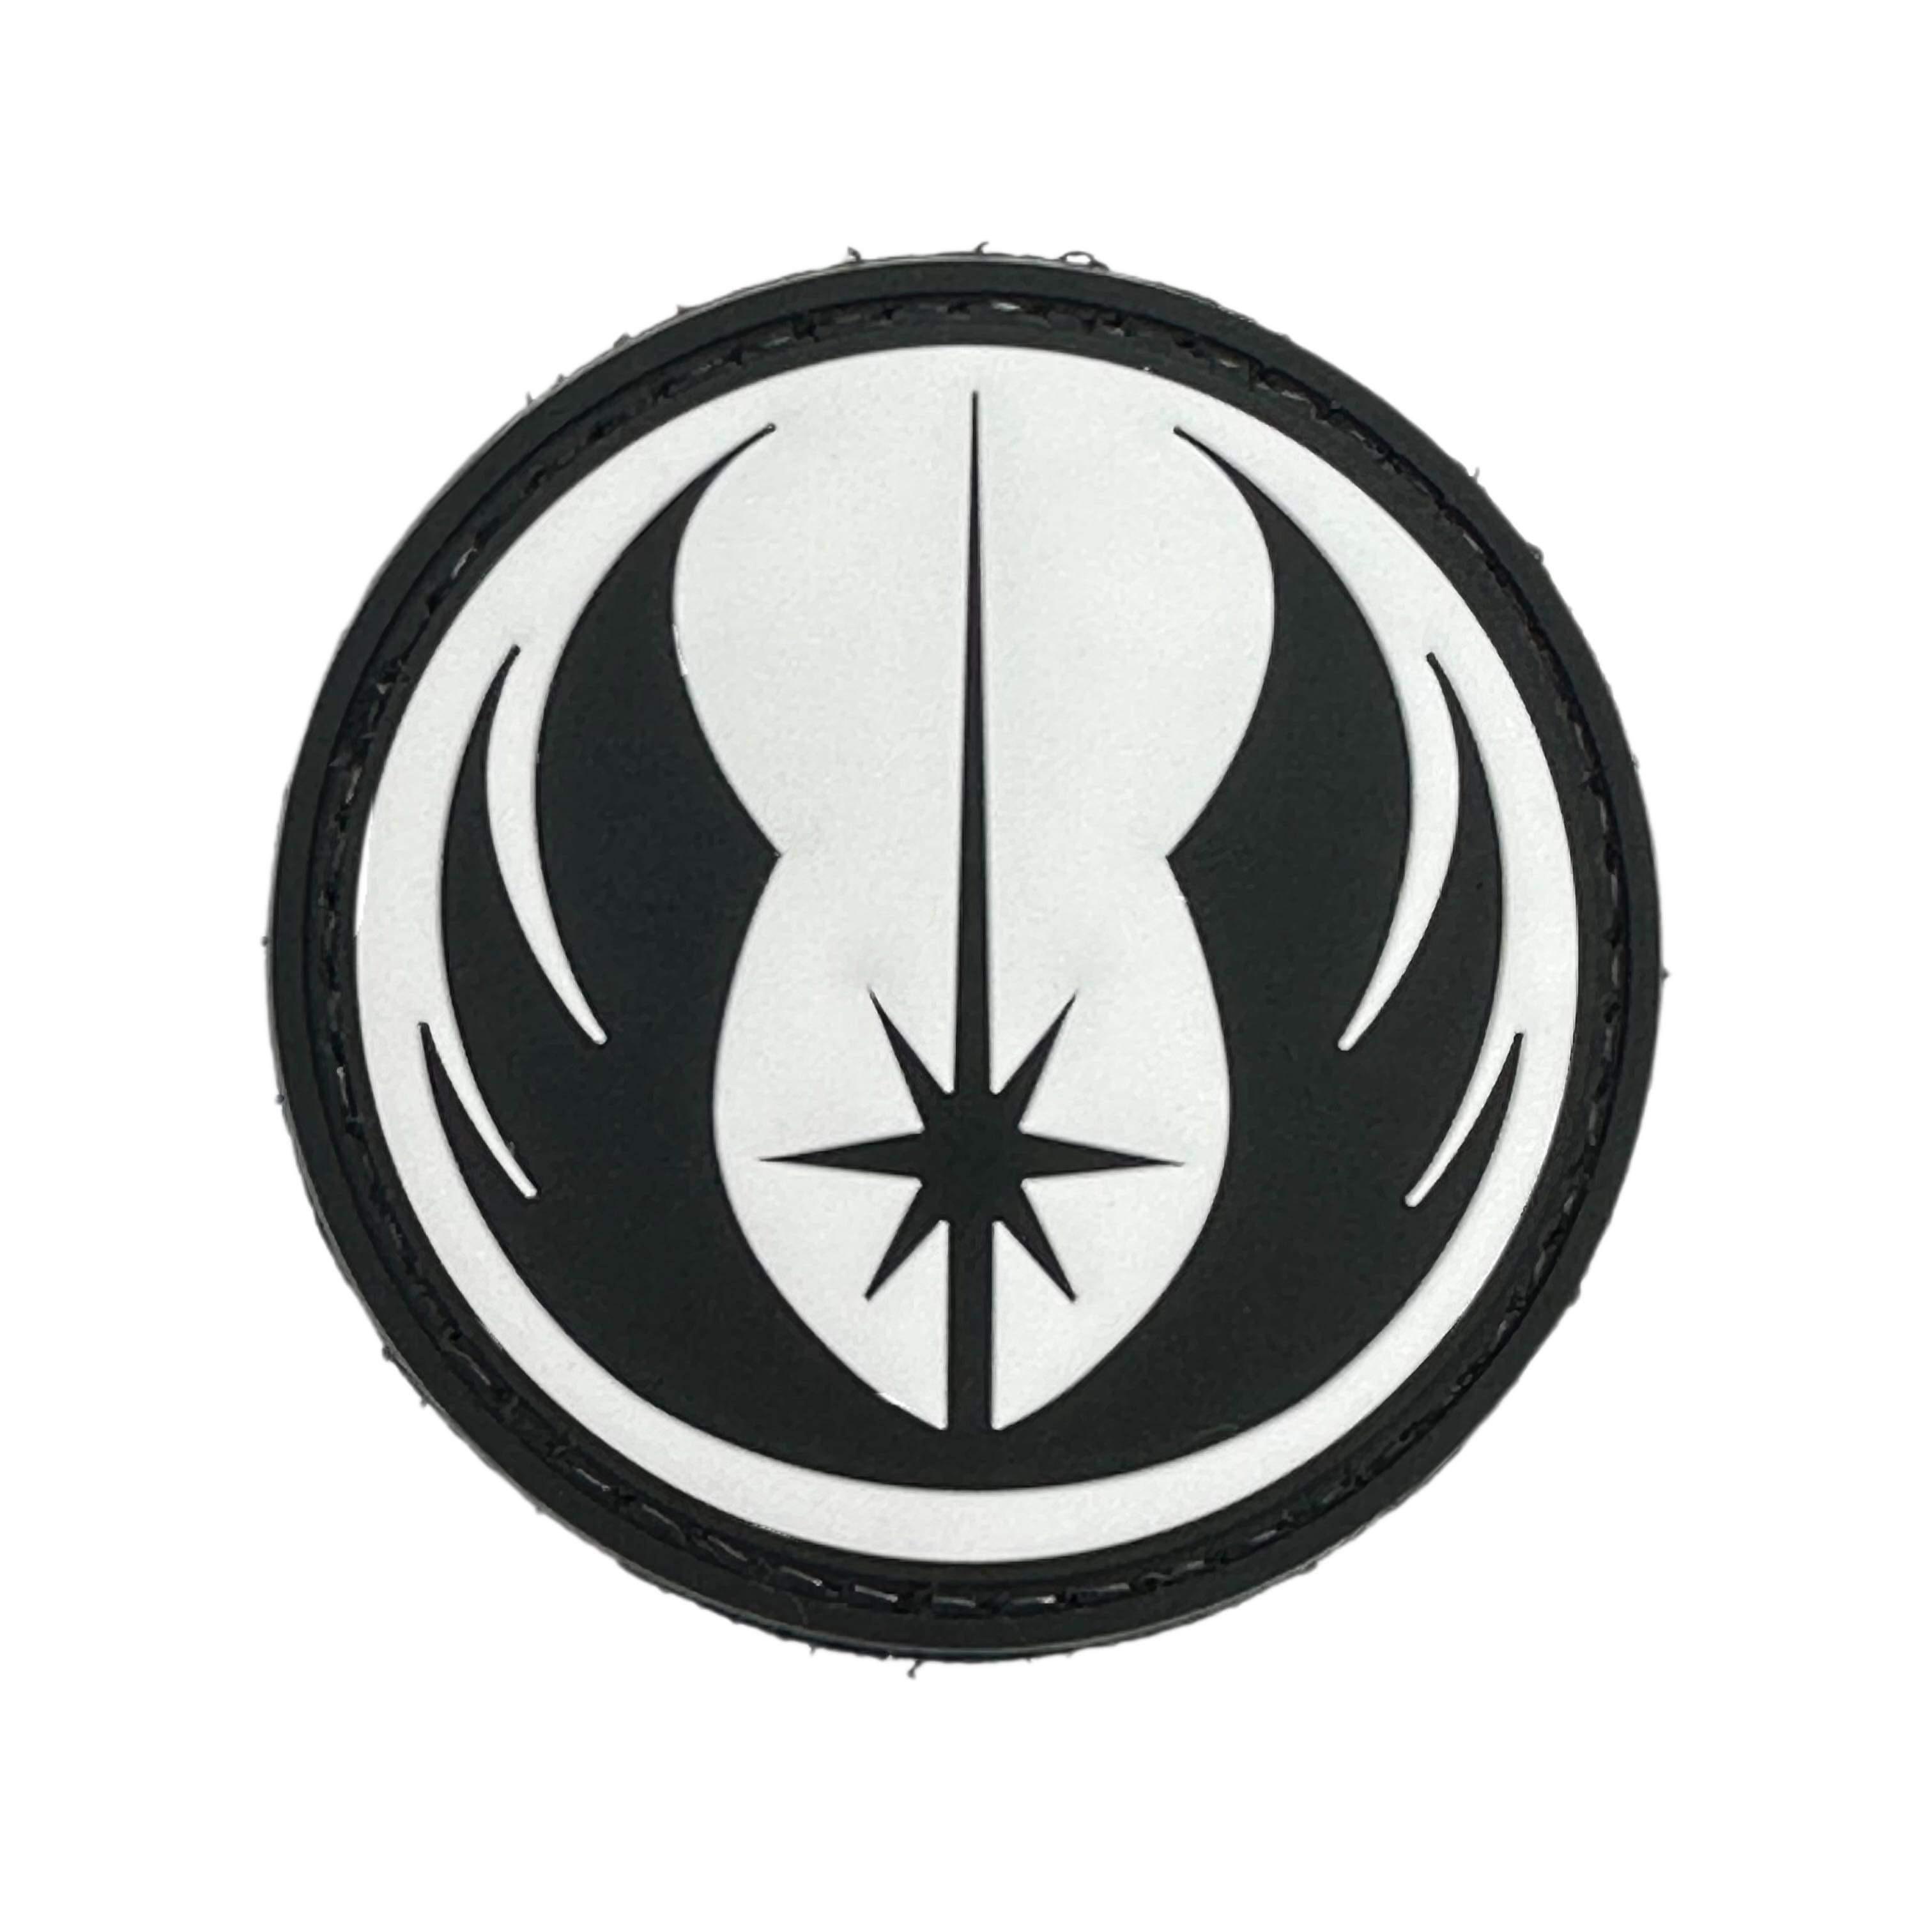 Rubber Patch - Galactic Republic Order of Jedi Knights